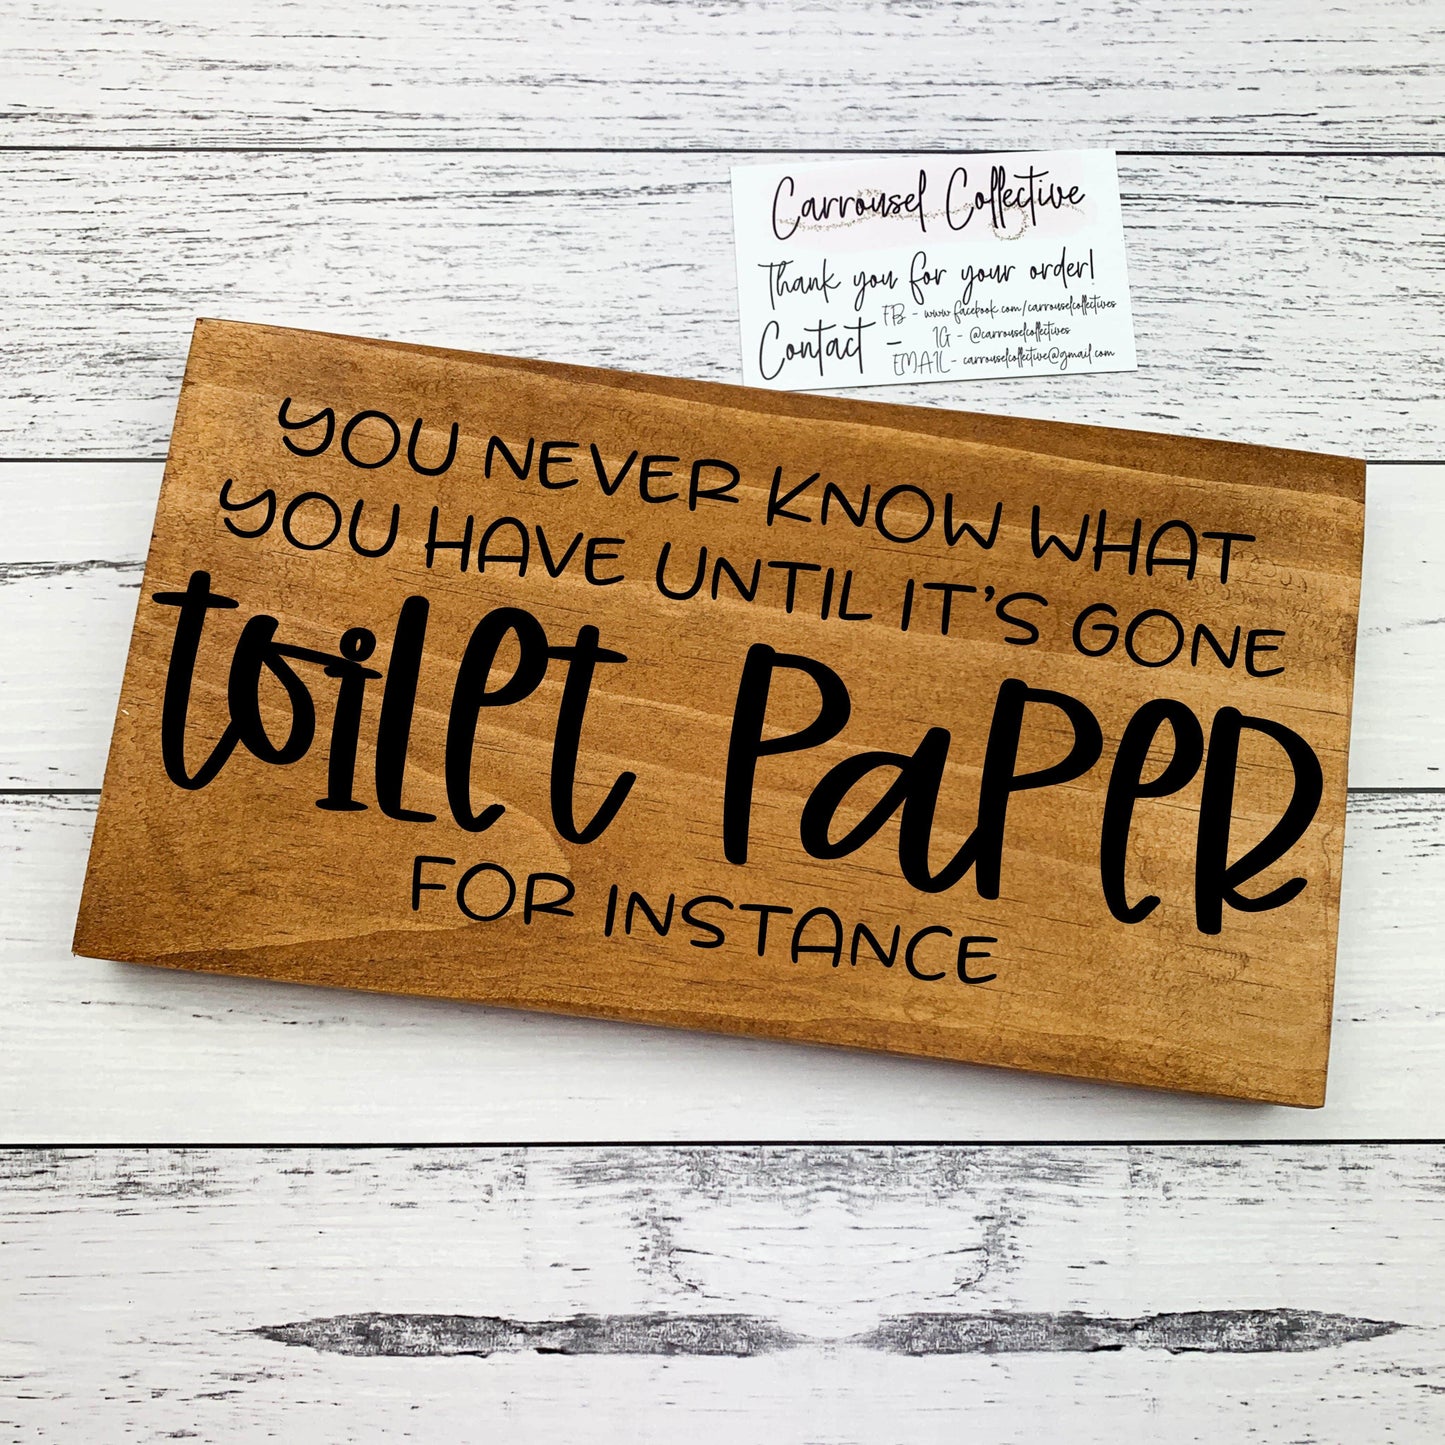 You never know what you have until its gone, toilet paper for example, Bathroom Wood Sign, Bathroom Decor, Home Decor